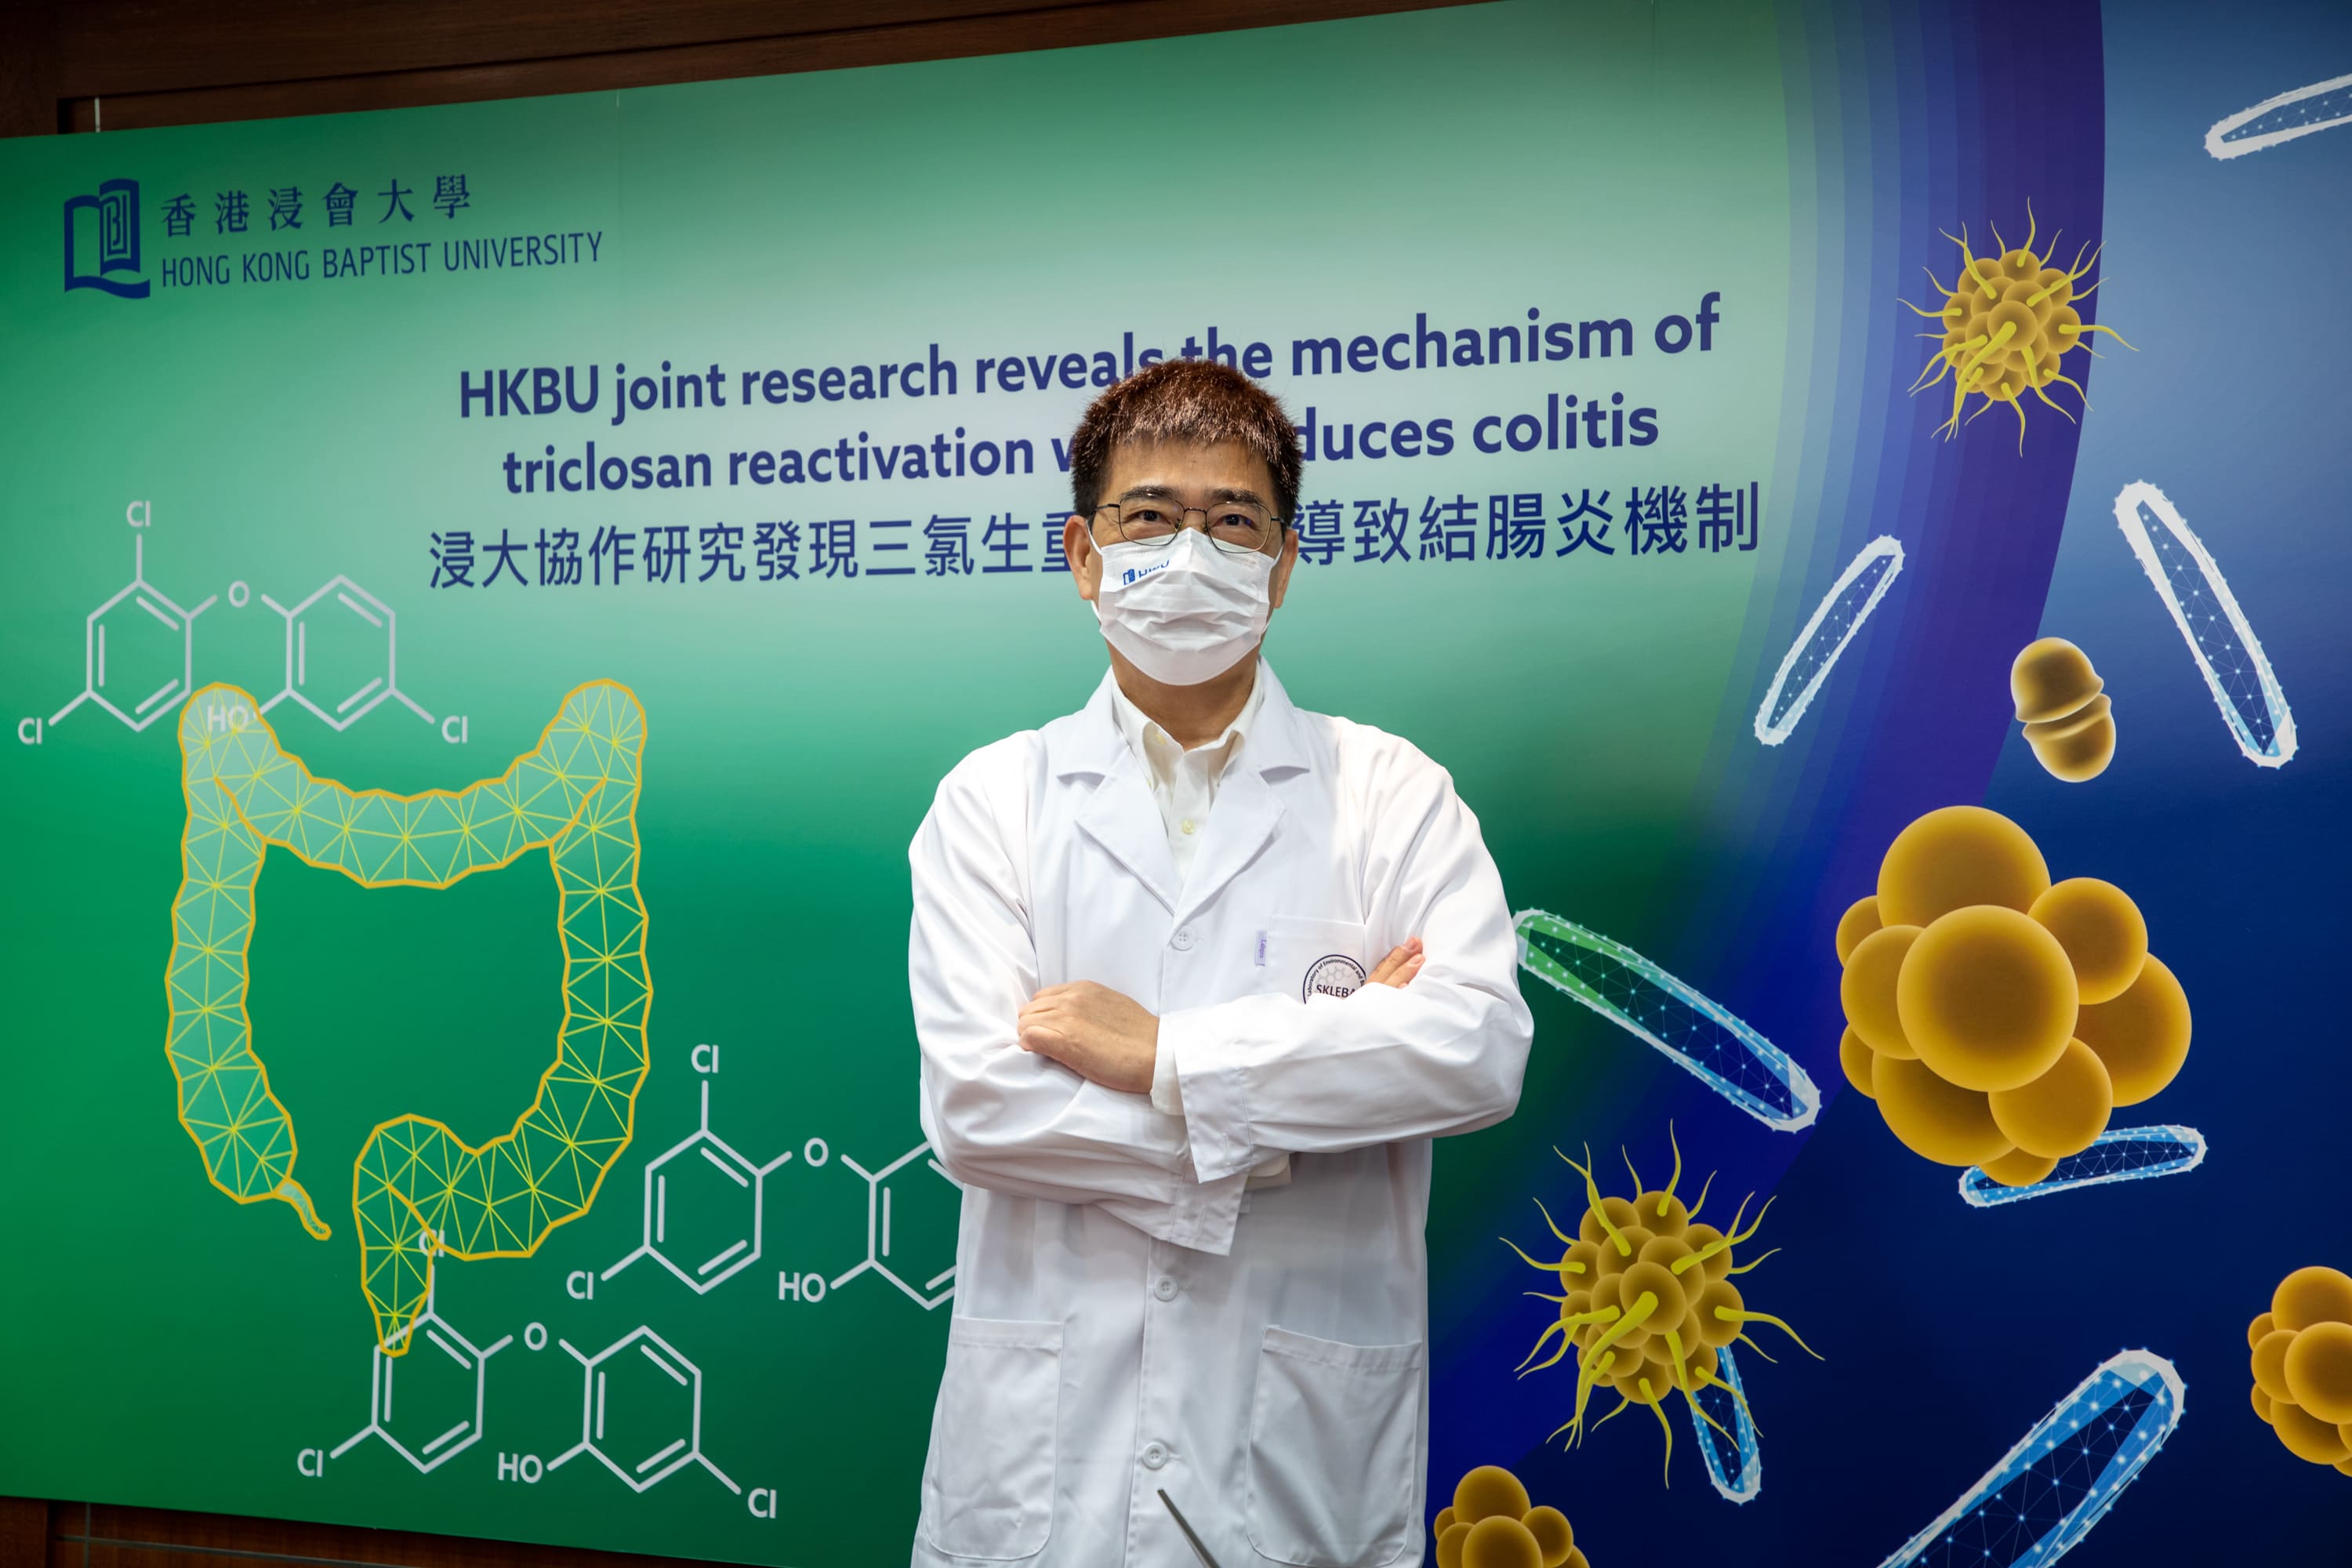 Professor Cai Zongwei, Chair Professor of the Department of Chemistry and Director of the State Key Laboratory of Environmental and Biological Analysis at HKBU, points out that according to the research results specific gut microbial enzymes drive the conversion of TCS metabolites to TCS which increases the chance of developing colitis.